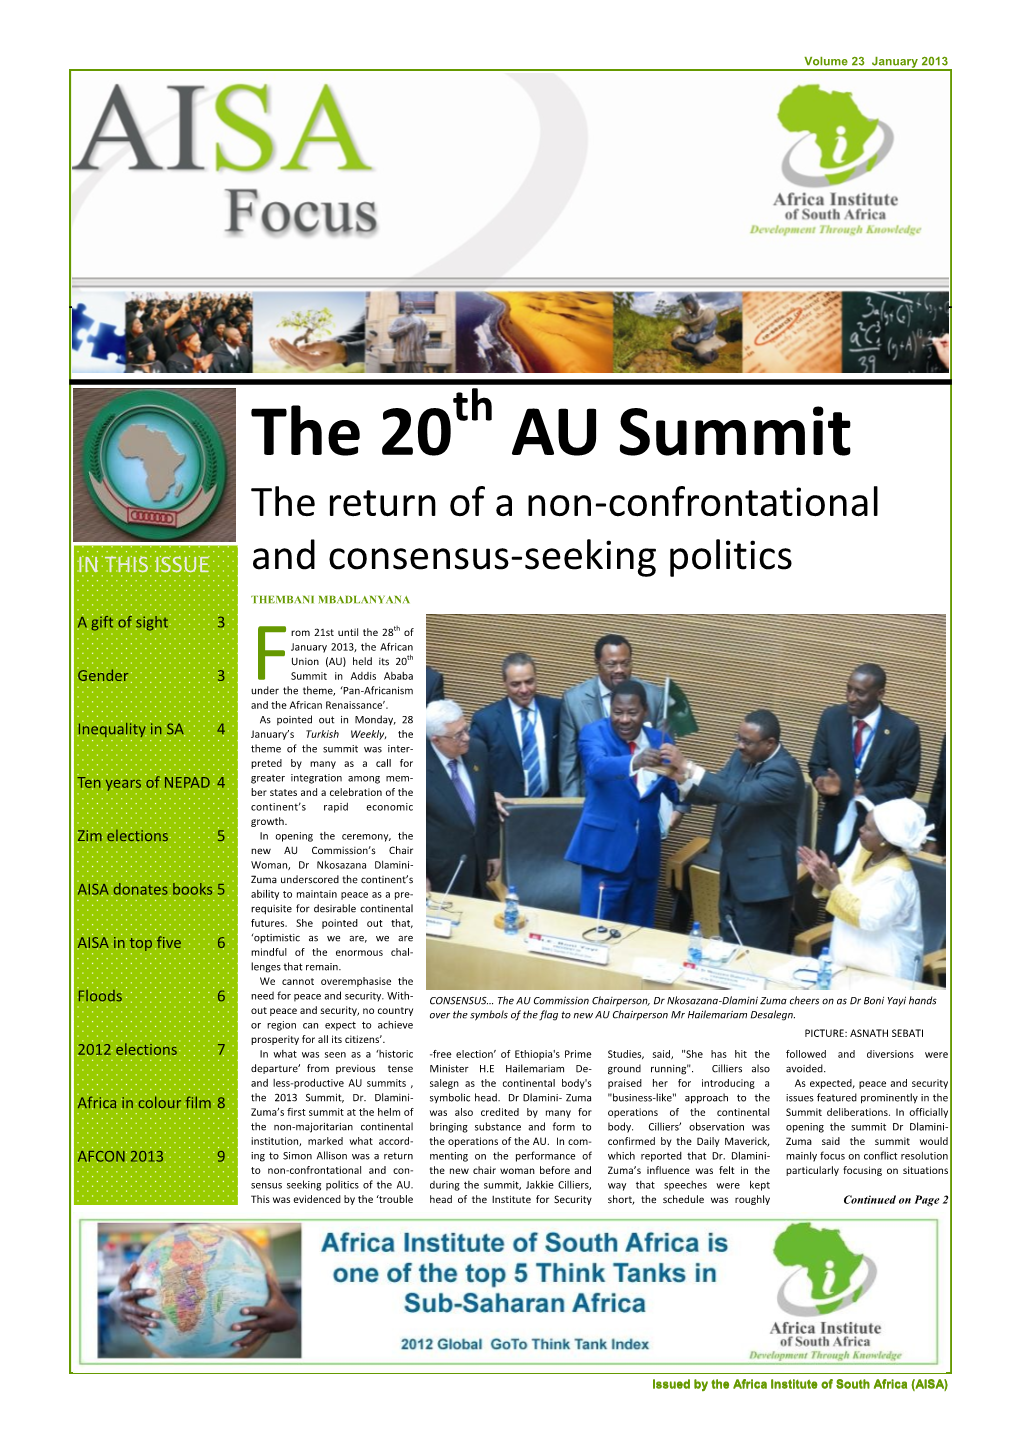 The 20 AU Summit the Return of a Non-Confrontational